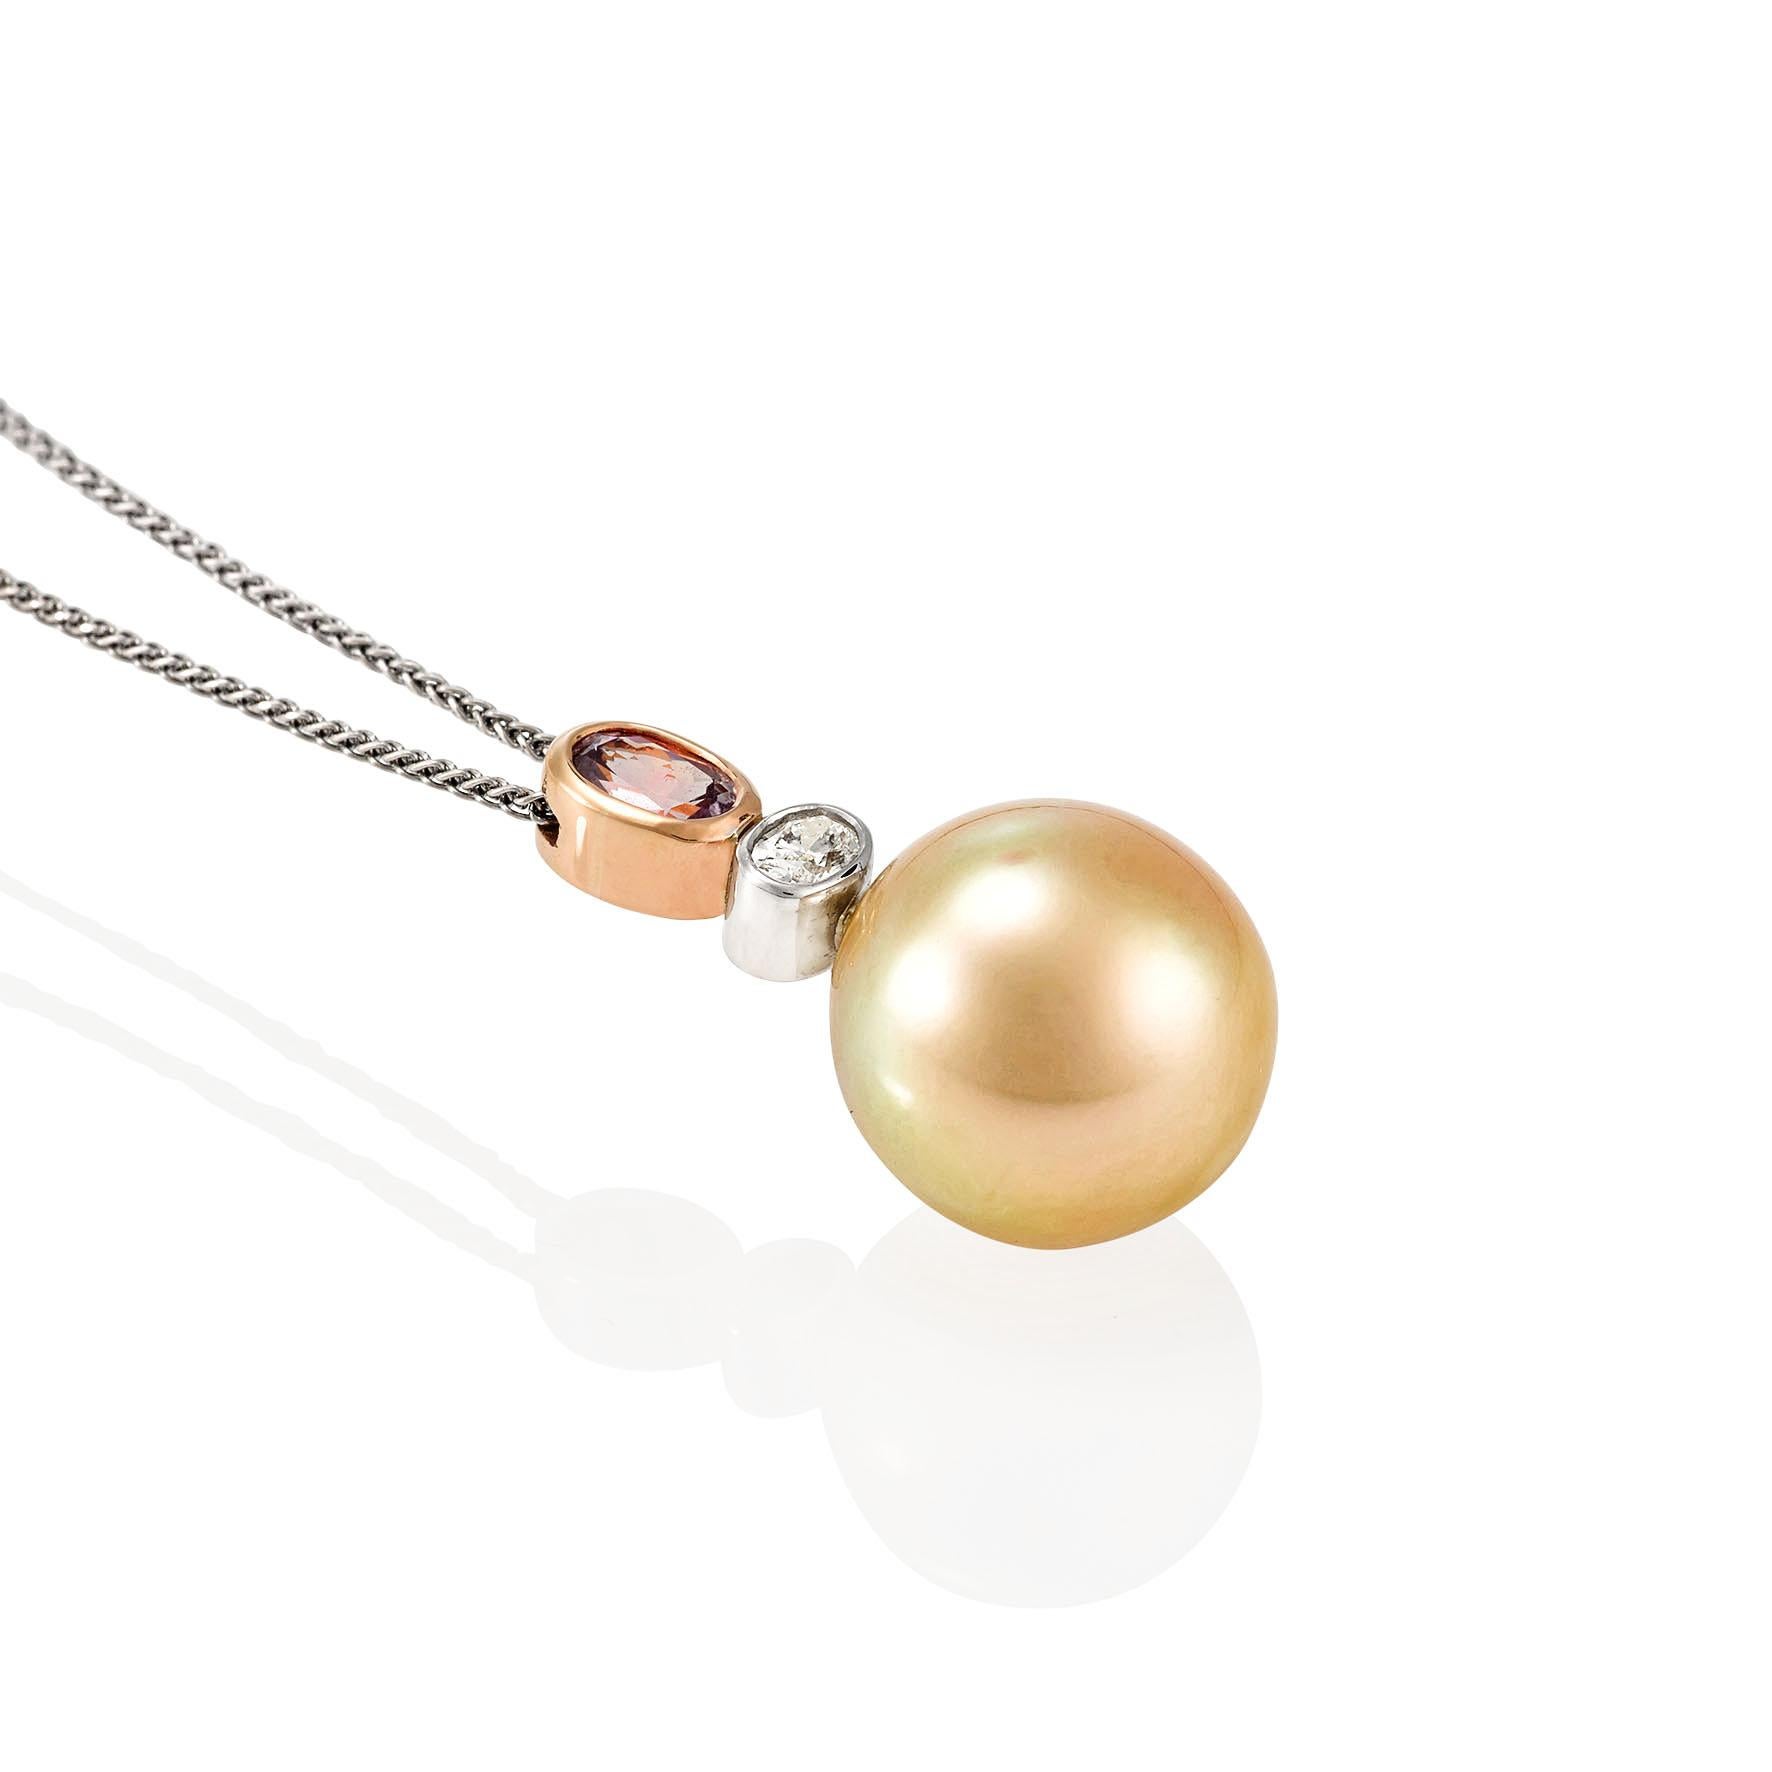 Giulians 18 karat Golden South Sea pearl, diamond and pink sapphire pendant. This pendant features one 14.2mm round, south sea cultured pearl with a high lustre and clean surface.  The bail features 0.19ct oval cut white diamond (F/VS) in an 18